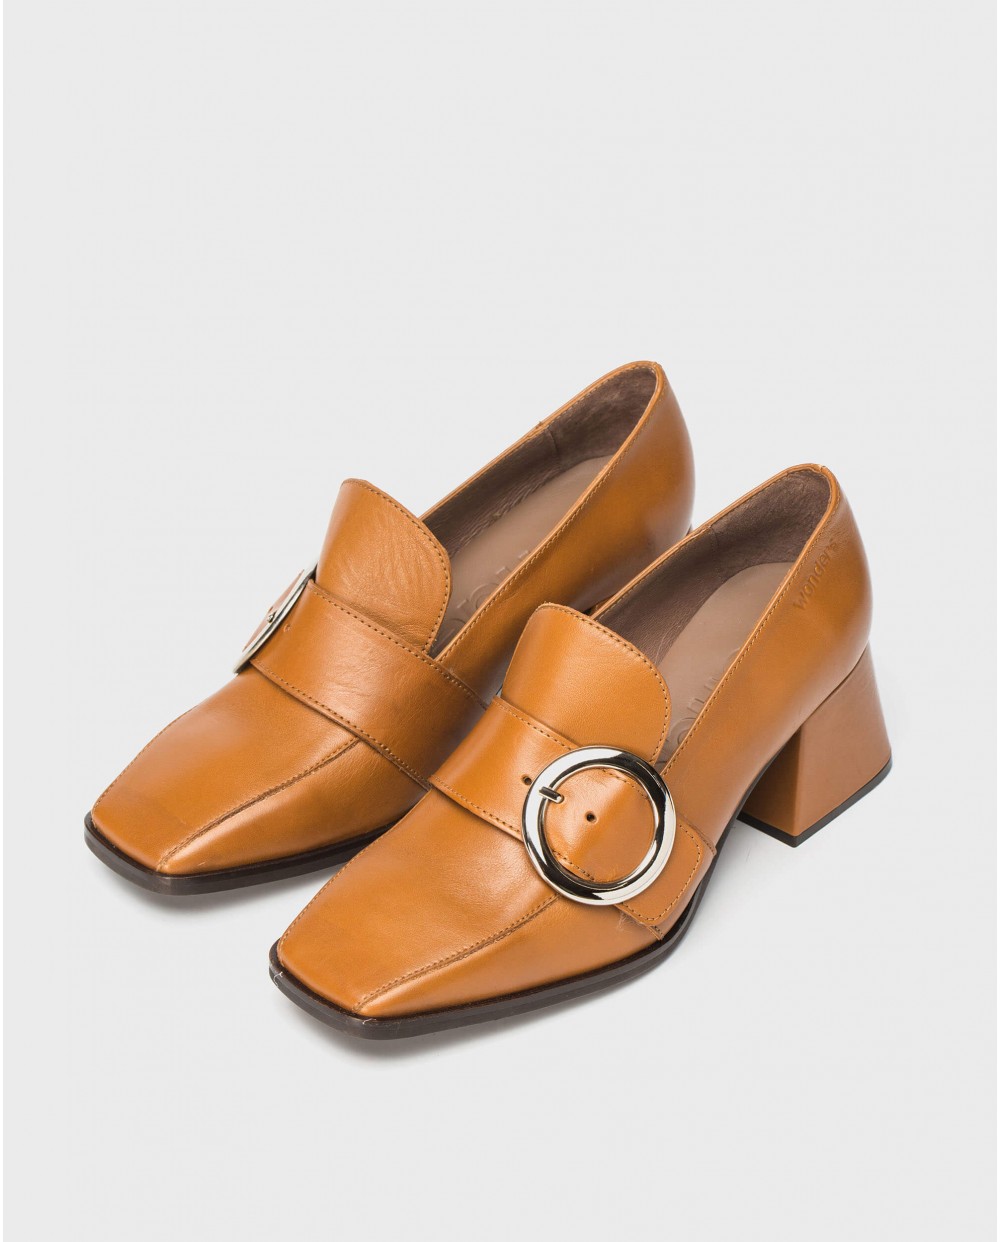 Wonders-Heels-High moccasin with buckle detail